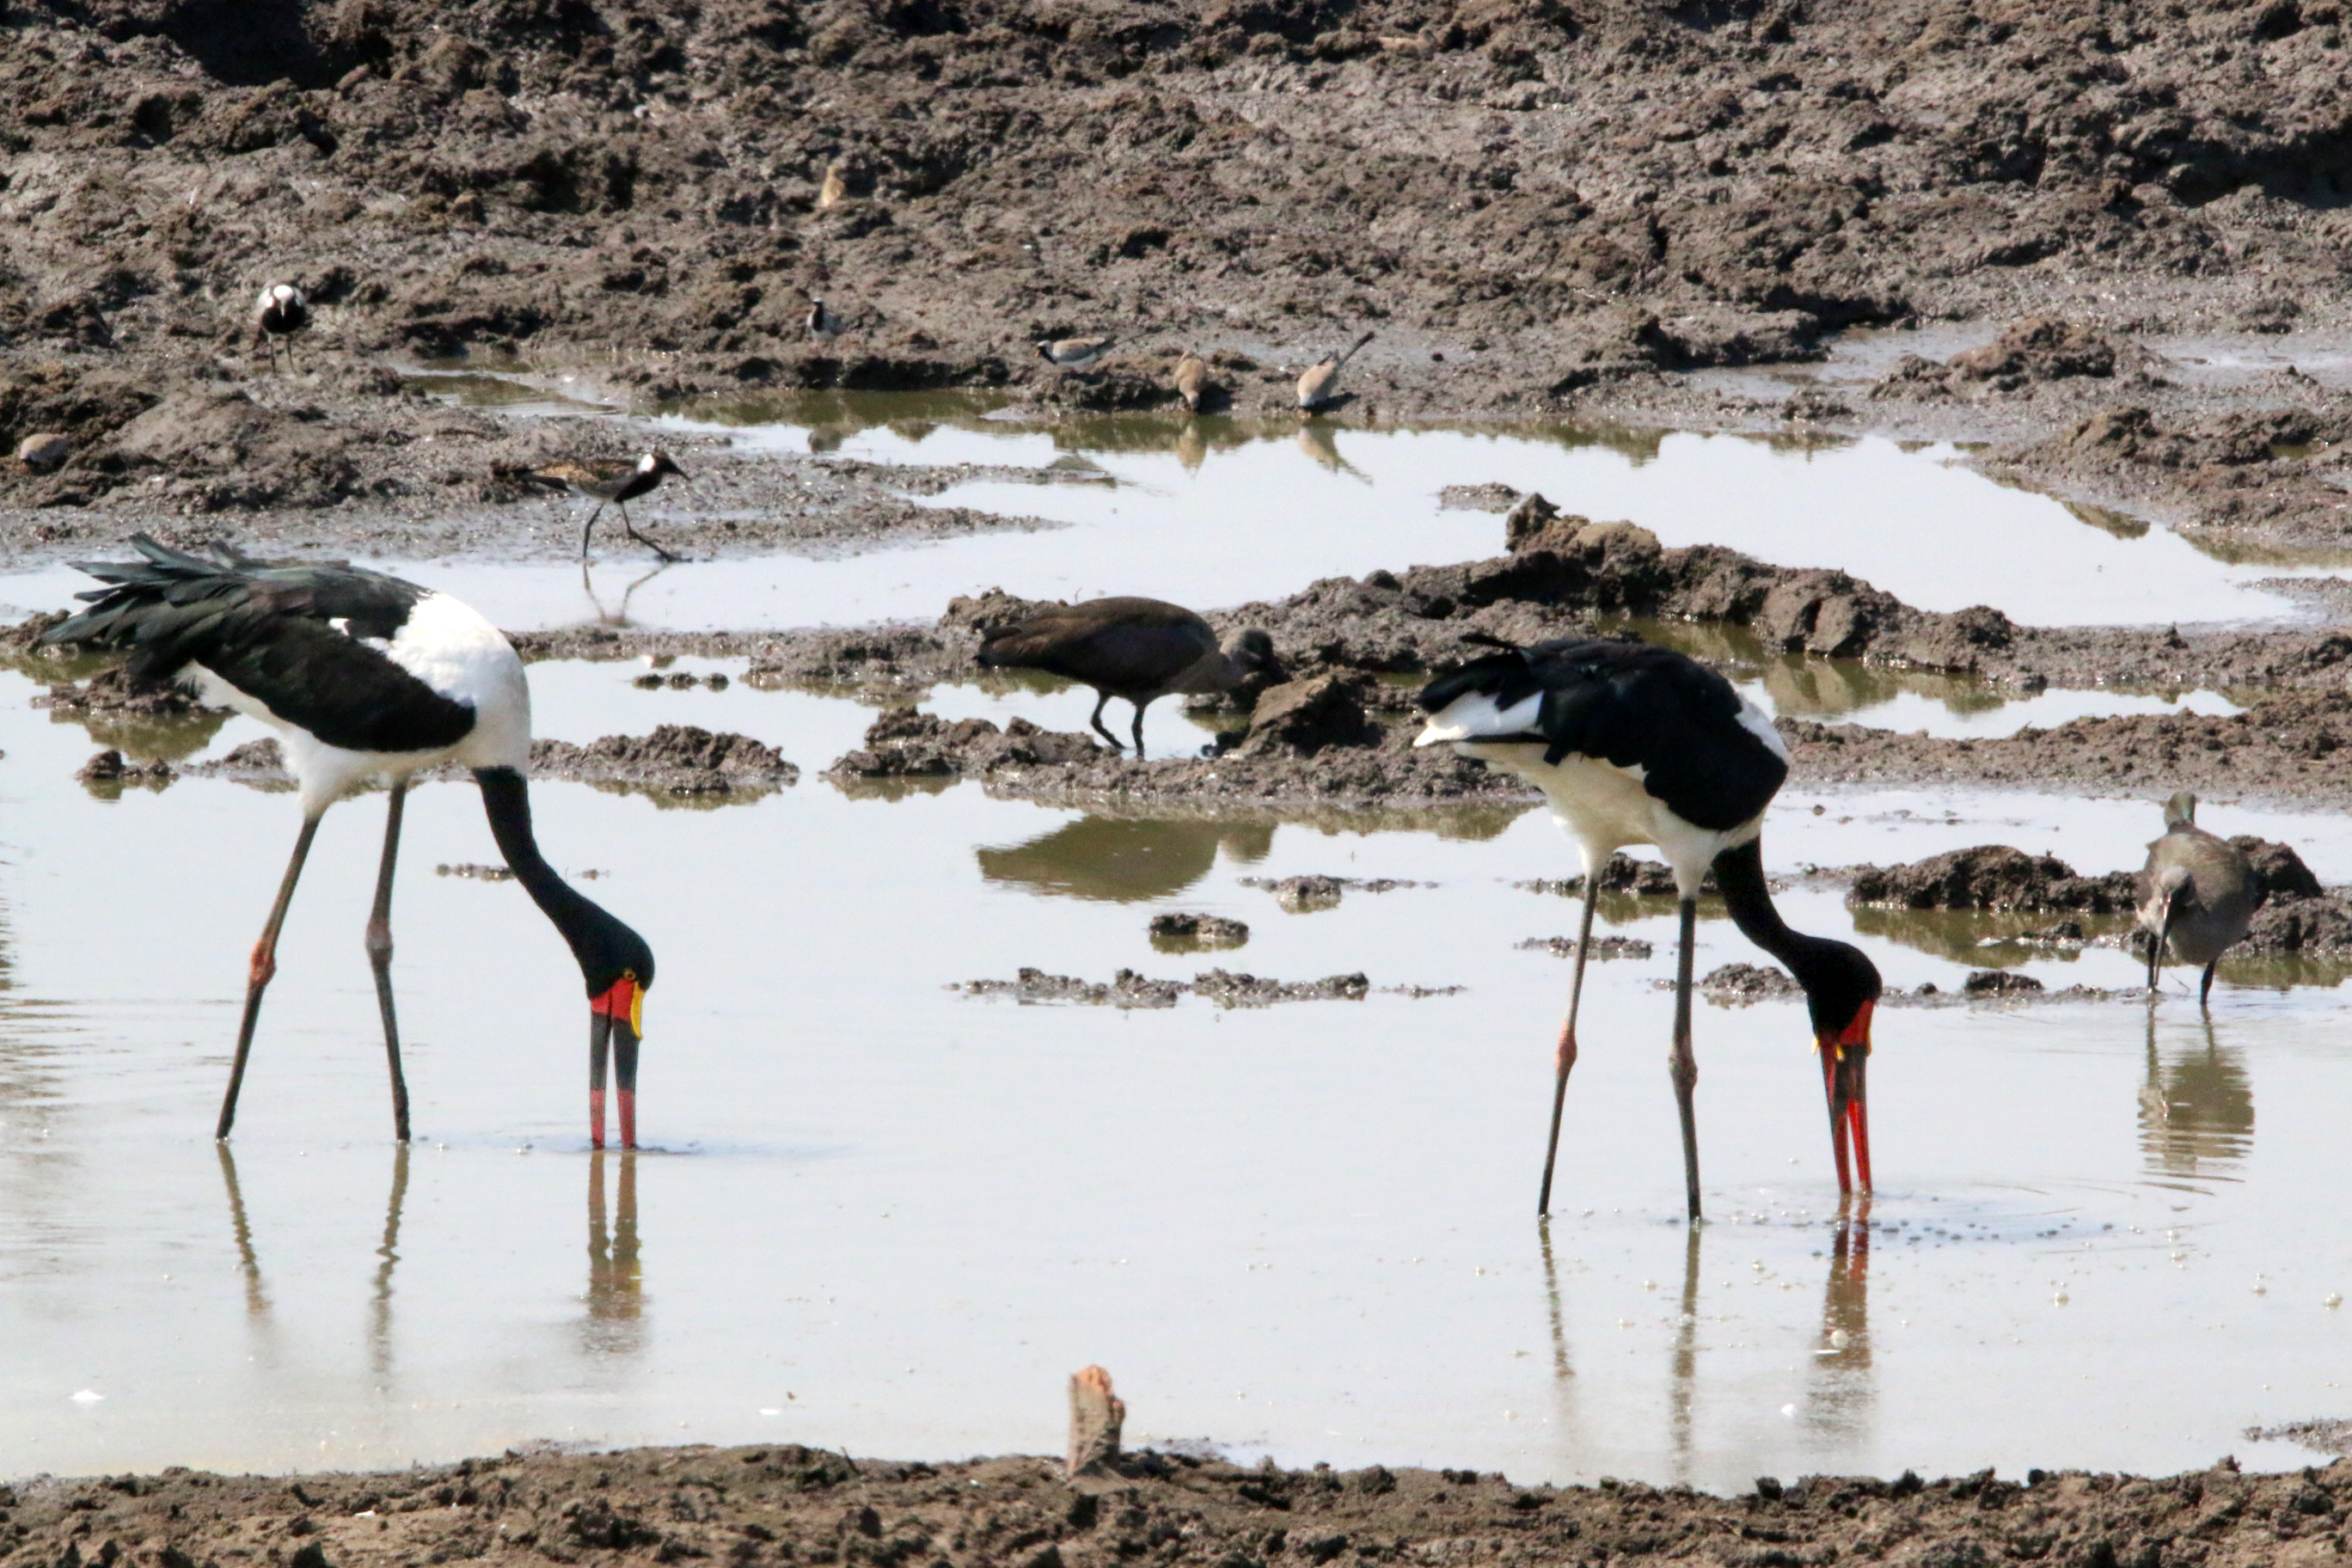  Saddle-billed storks in Africa foraging with their beaks partly below water. Spinosaurus may have done something similar. Image credit David Hone.